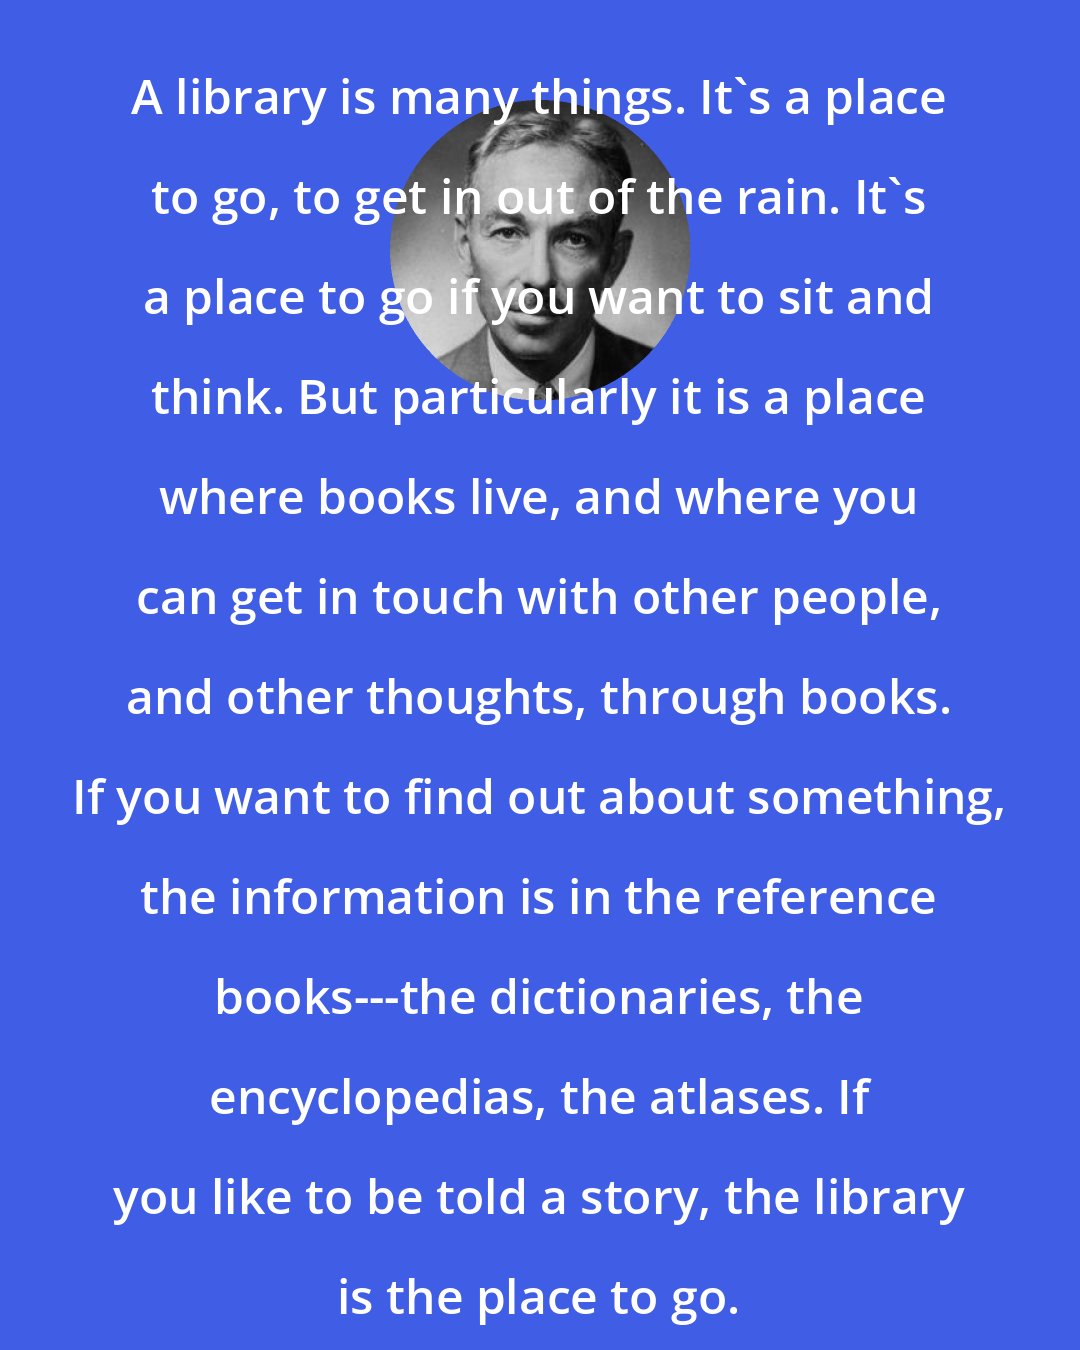 E. B. White: A library is many things. It's a place to go, to get in out of the rain. It's a place to go if you want to sit and think. But particularly it is a place where books live, and where you can get in touch with other people, and other thoughts, through books. If you want to find out about something, the information is in the reference books---the dictionaries, the encyclopedias, the atlases. If you like to be told a story, the library is the place to go.